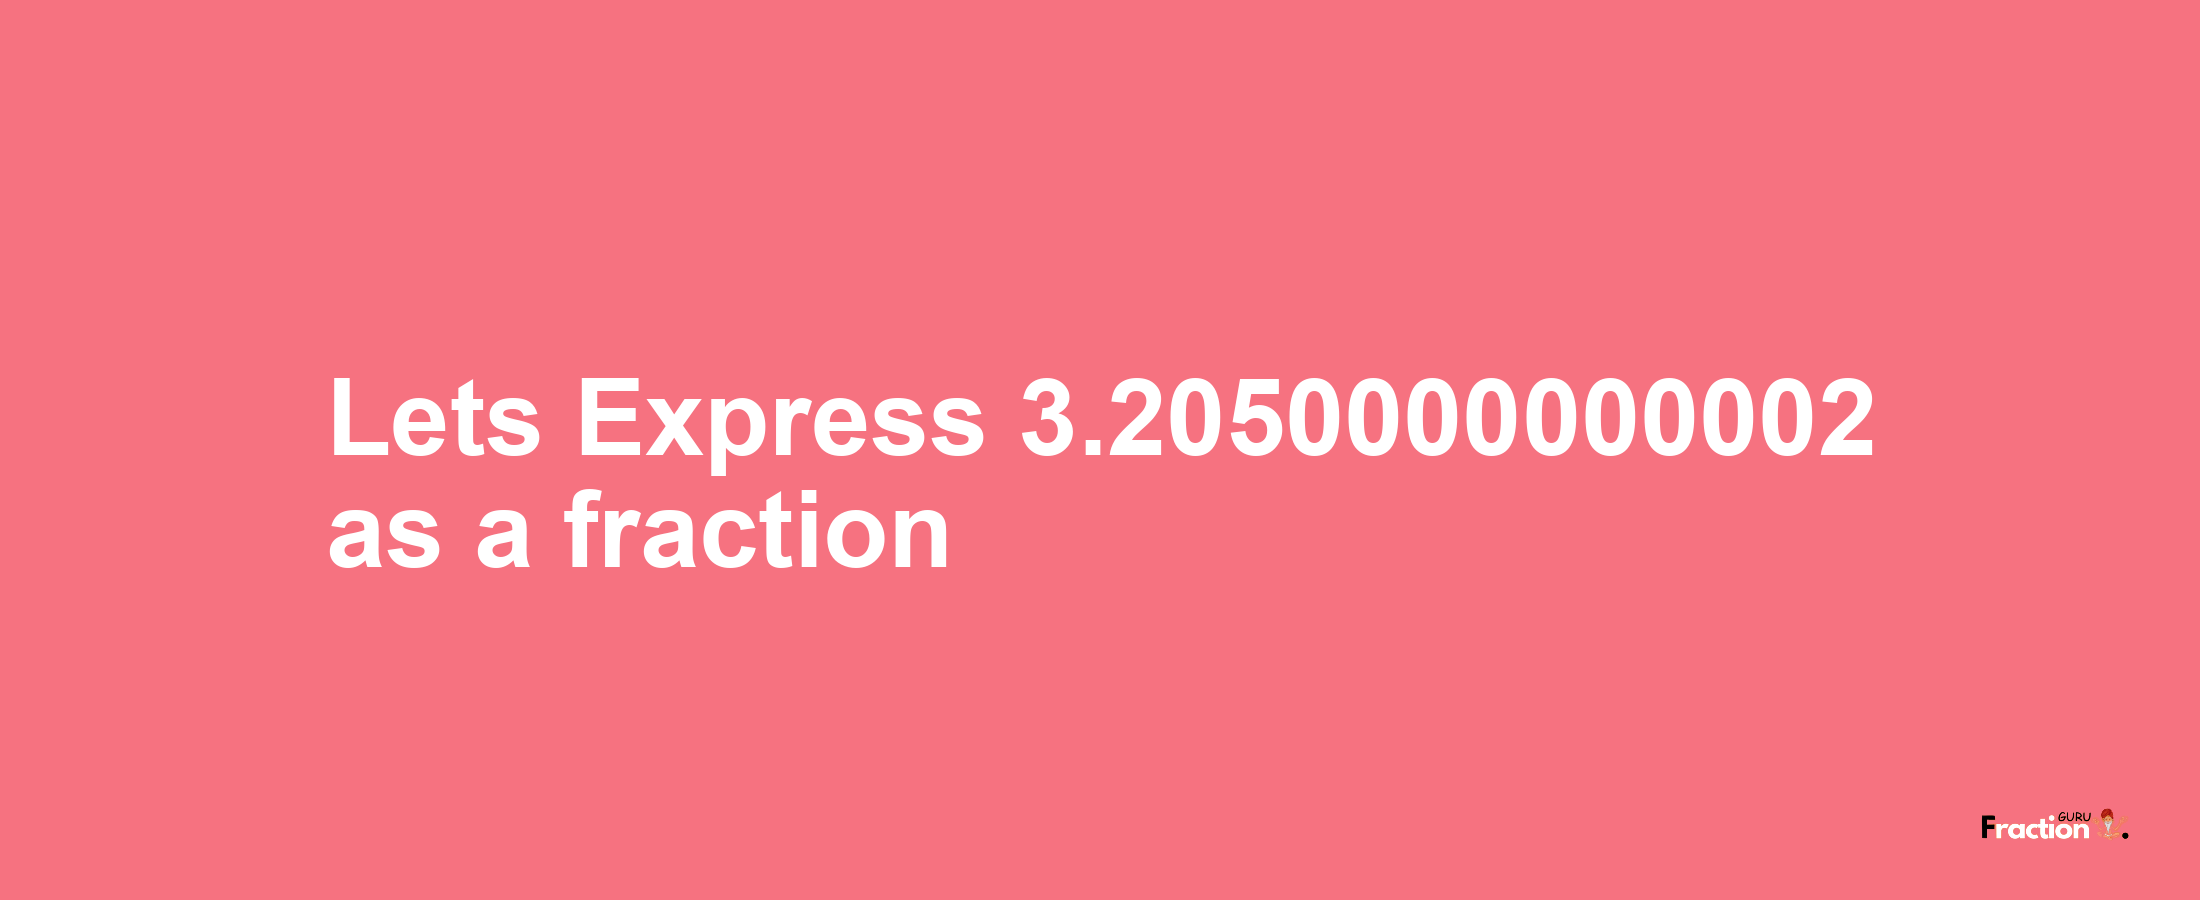 Lets Express 3.2050000000002 as afraction